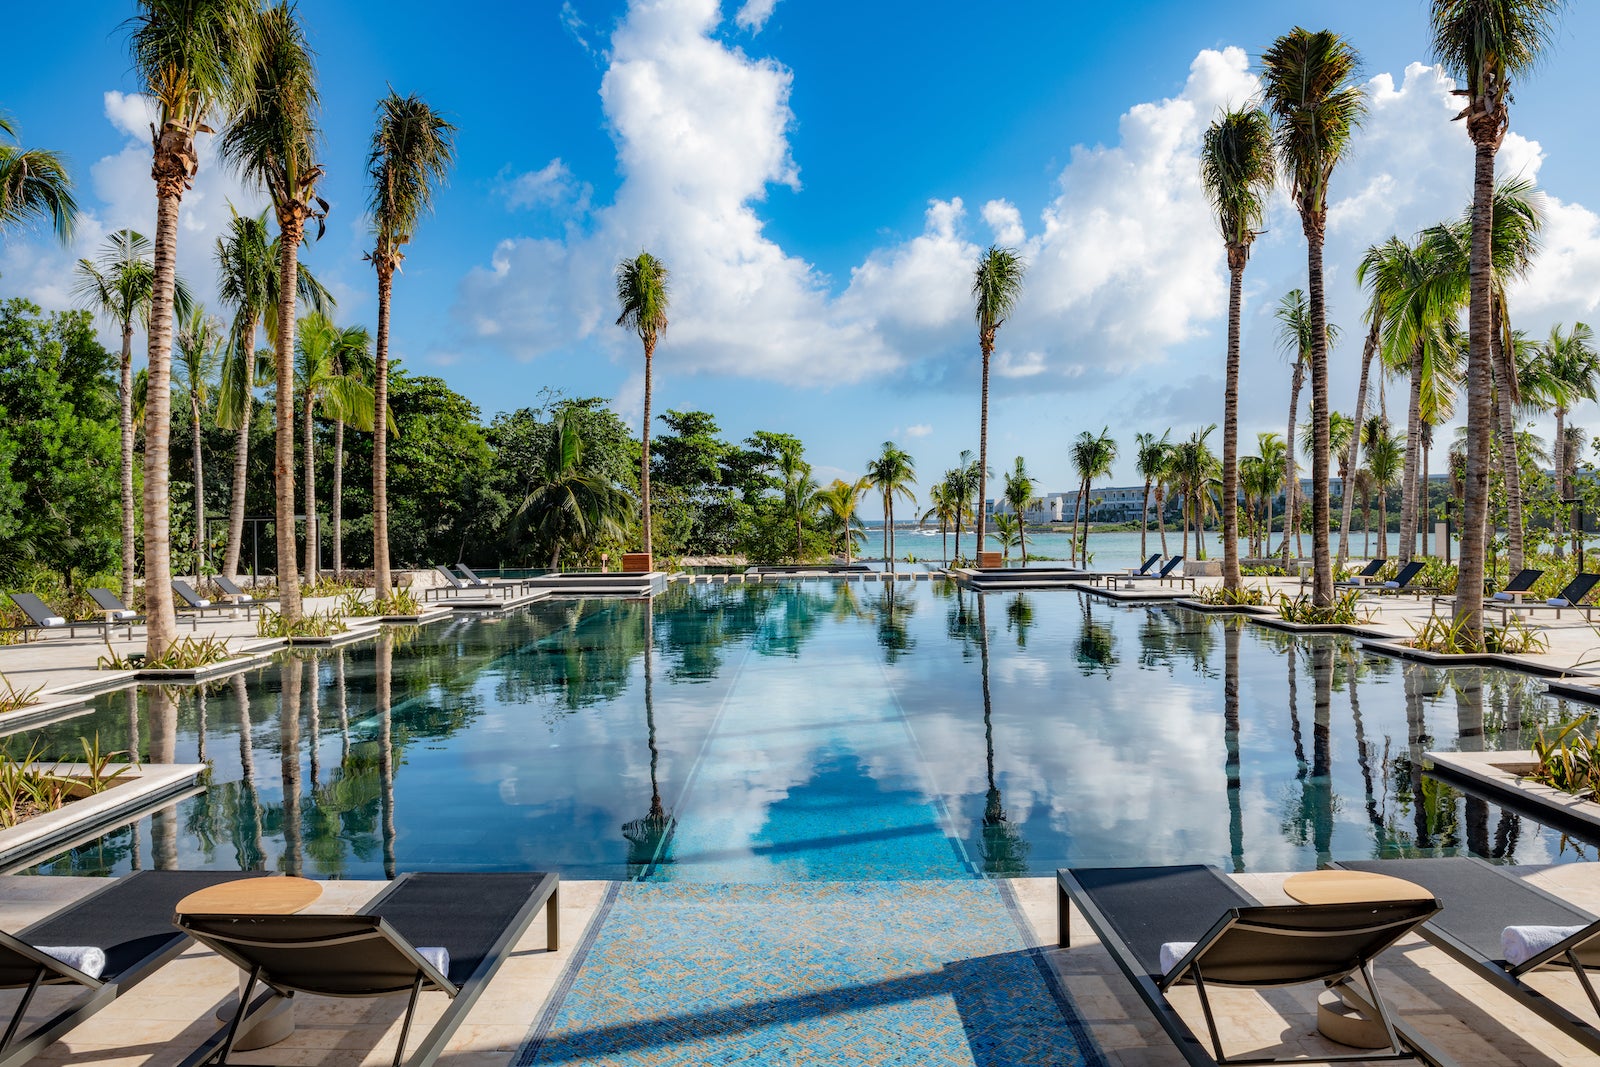 large pool surrounded by palm trees and lounge chairs